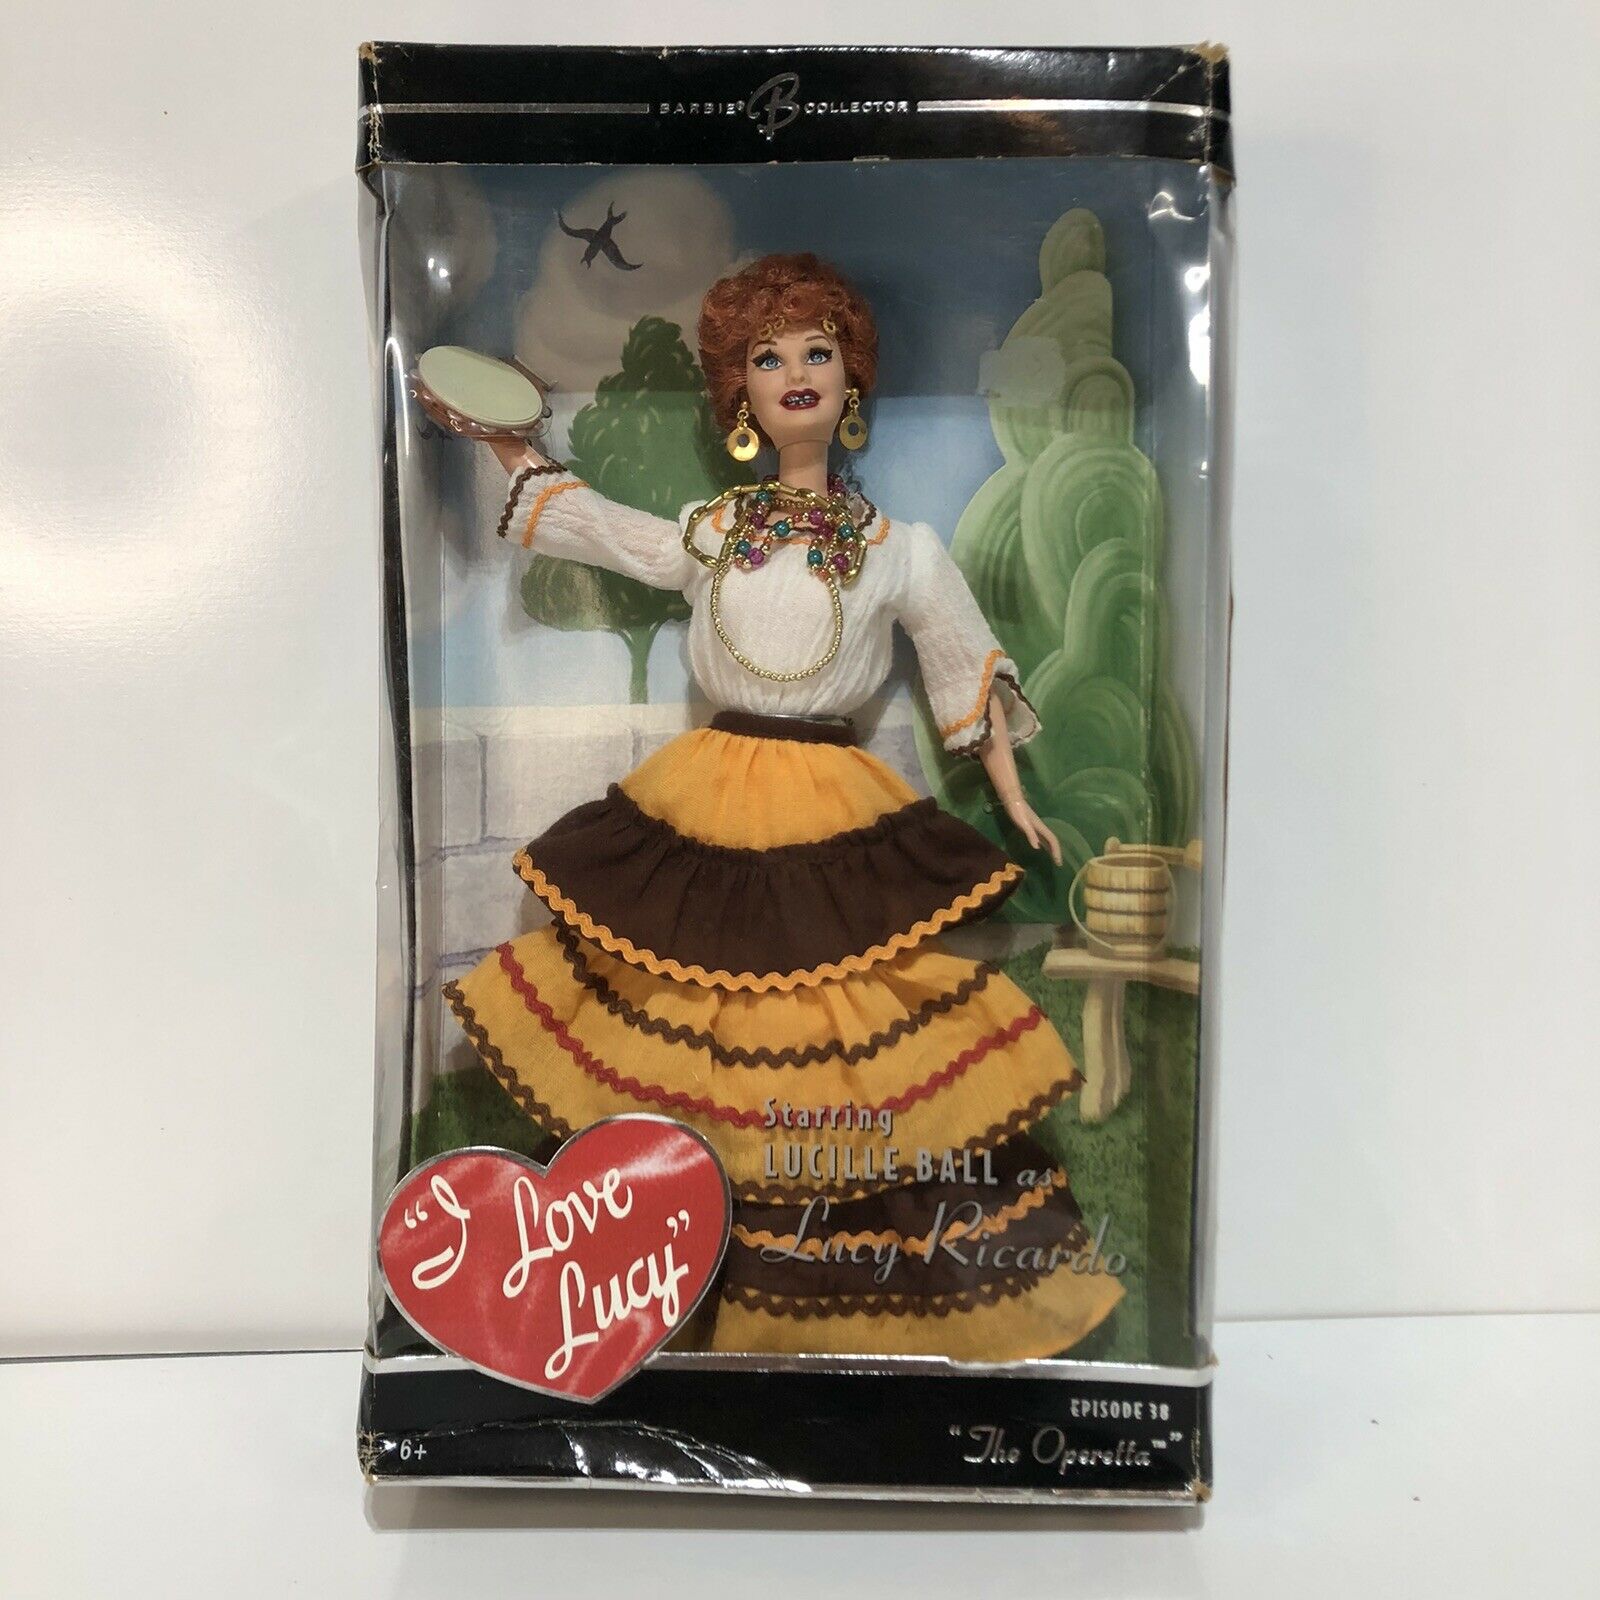 Mattel, I Love Lucy Doll, Barbie, The Operetta, Ep. 38, 2005, New